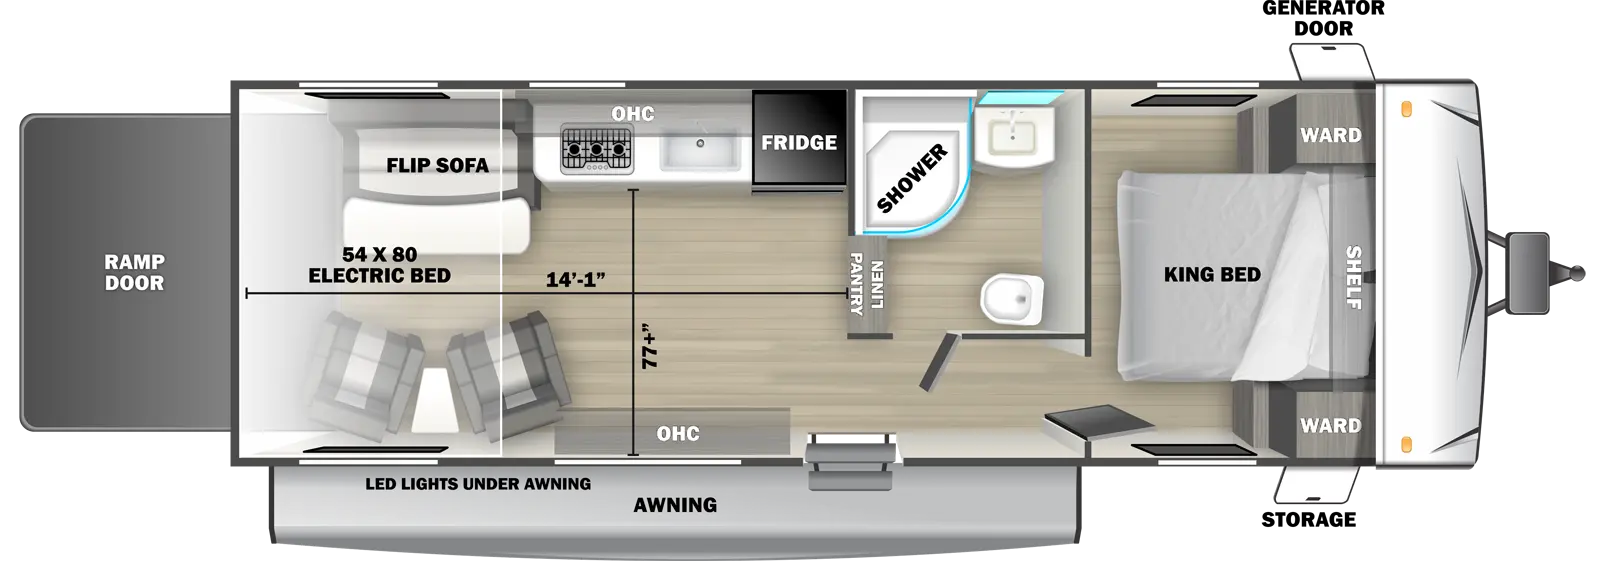 The 2530SLE travel trailer has no slide outs, 1 entry door and 1 rear ramp door. Exterior features include an awning with LED lights, front door side storage and front off-door side generator door. Interior layout from front to back includes: front bedroom with foot-facing King bed, shelf over the bed, and front corner wardrobes; off-door side bathroom with shower, linen storage, toilet and single sink vanity; off-door side kitchen with stovetop, overhead cabinet, sink and refrigerator; door side overhead cabinet; 54 x 80 electric bed sits over 2 recliners with end table and off-door side flip sofa. Cargo length from rear of unit to kitchen wall is 14 ft. 1 in. Cargo width from kitchen countertop to door side wall is 77 inches.